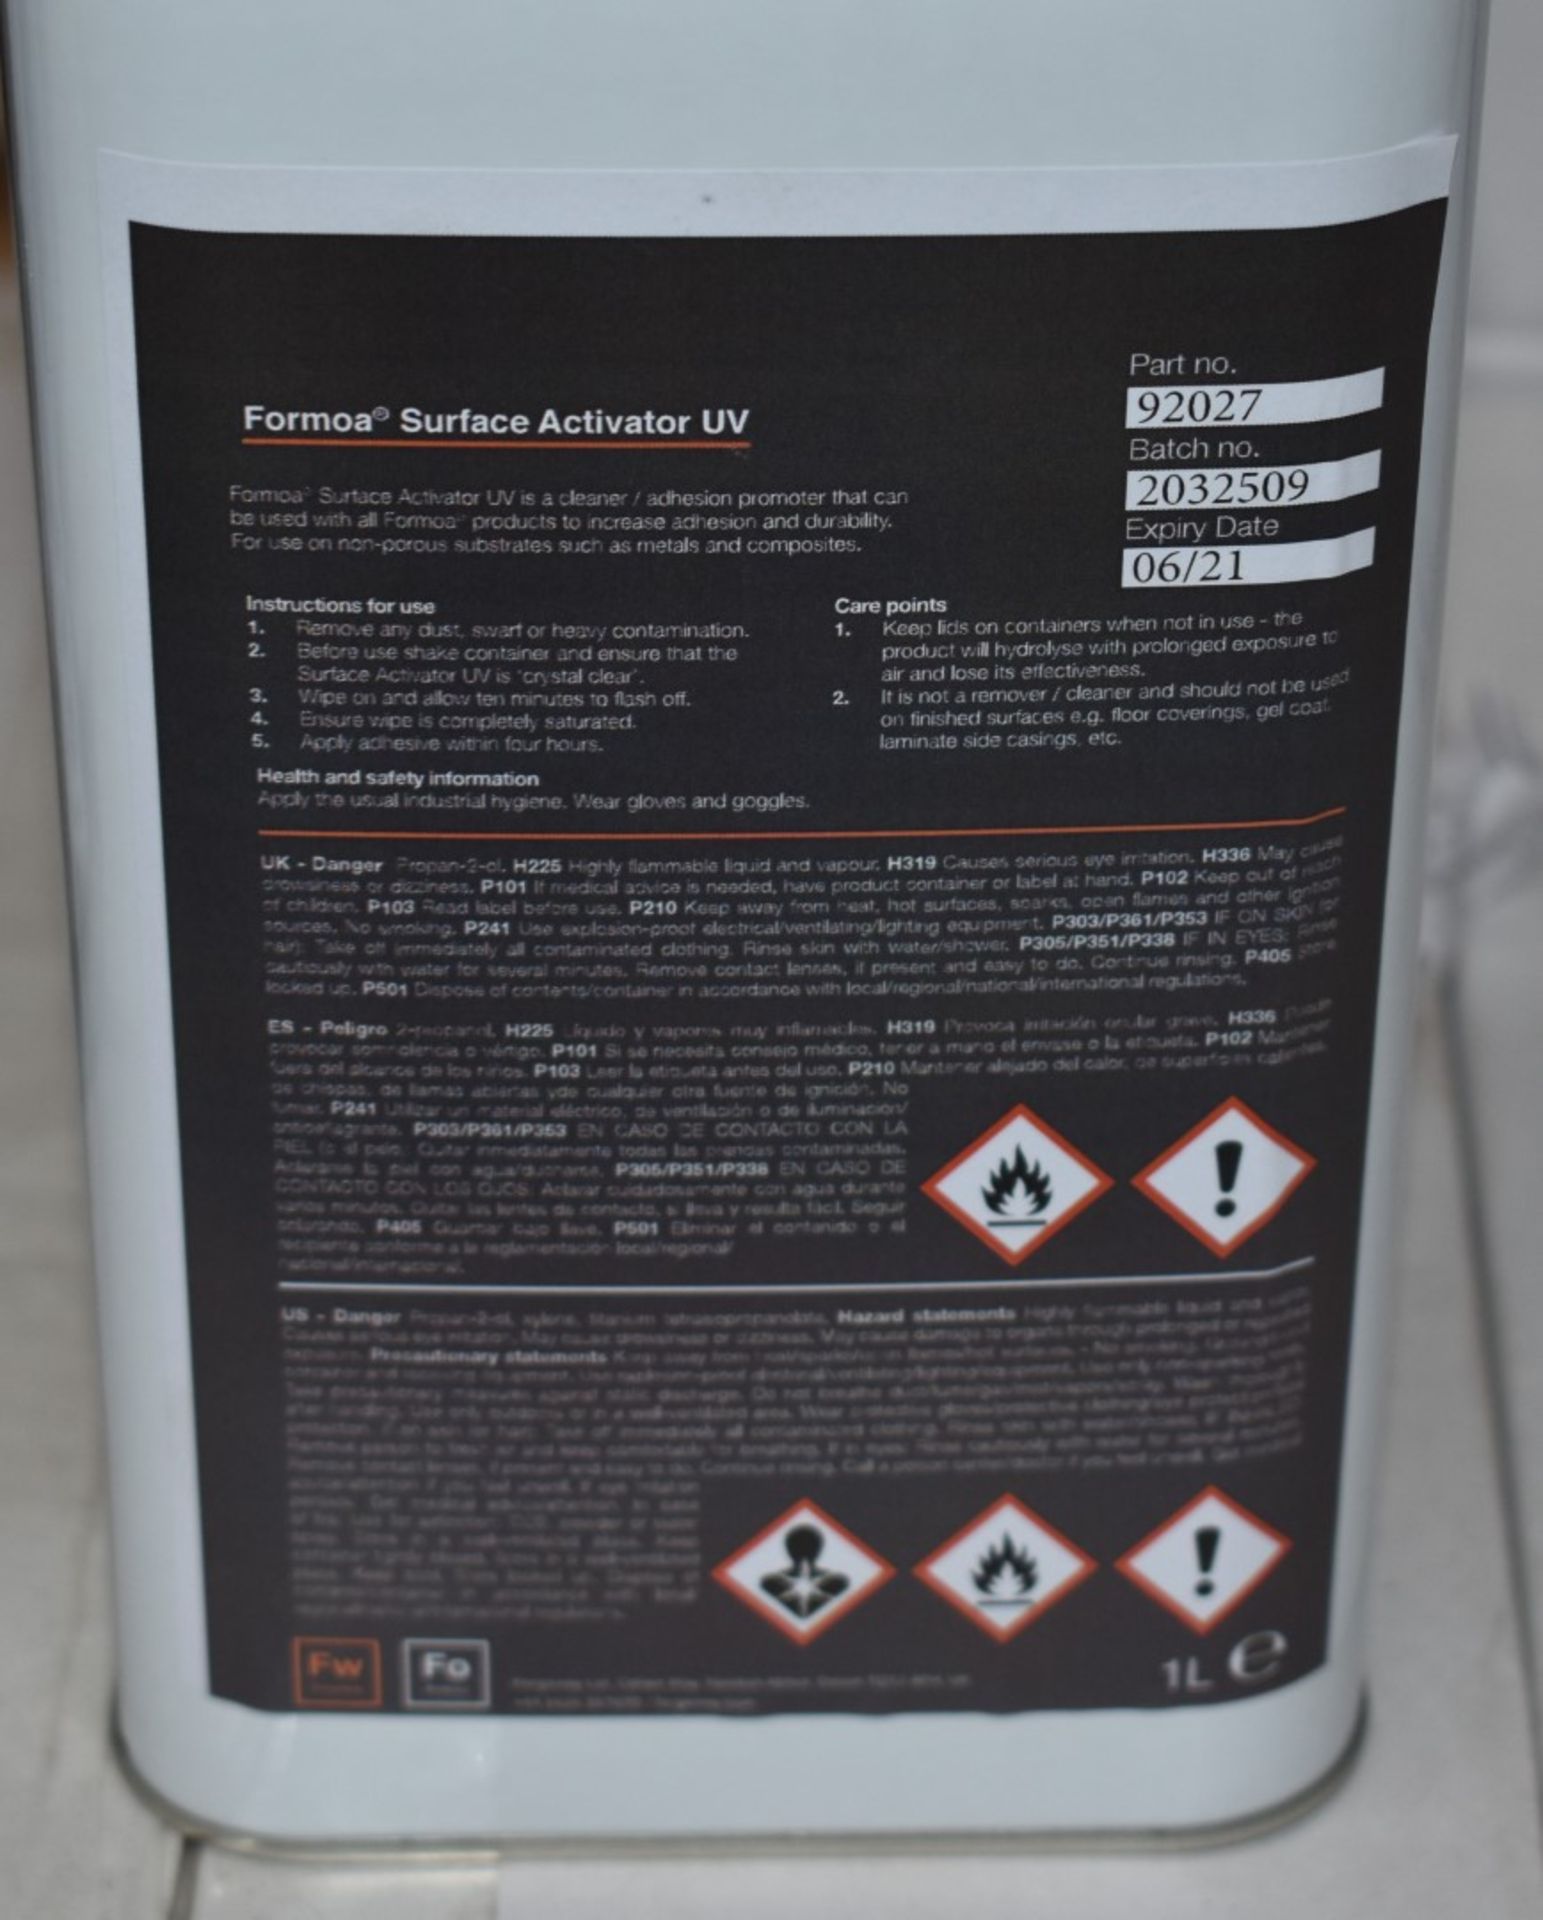 36 x Forgeway Formoa Surface Activator 1 Litre Containers - Adhesion Promotor, Cleaner, Degreaser - Image 4 of 6